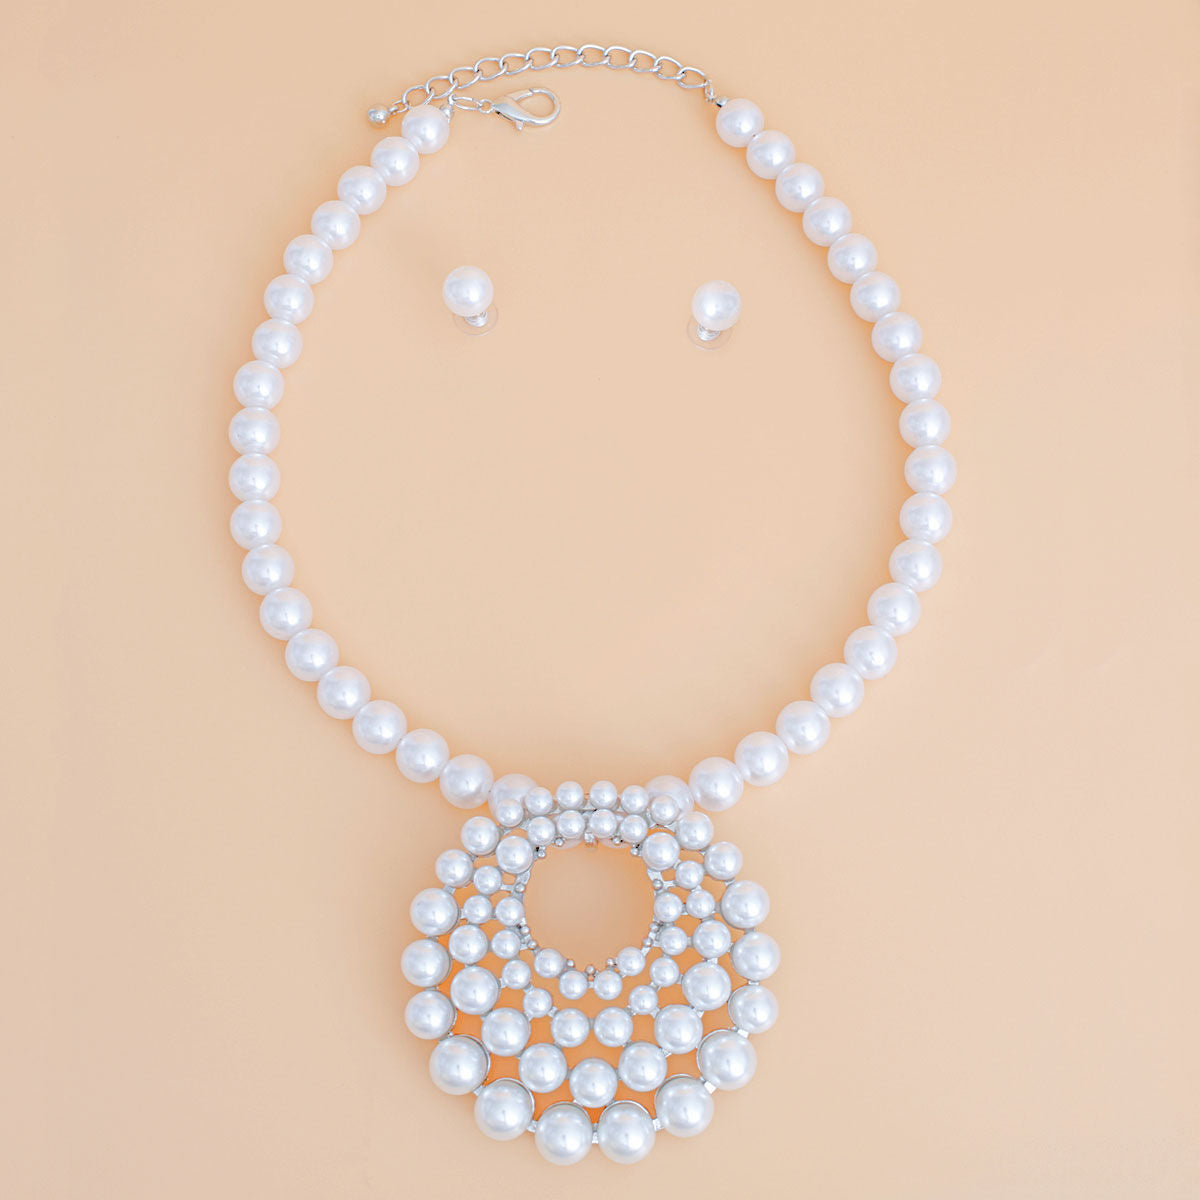 Pearl Necklace White Round Pendant Set for Women